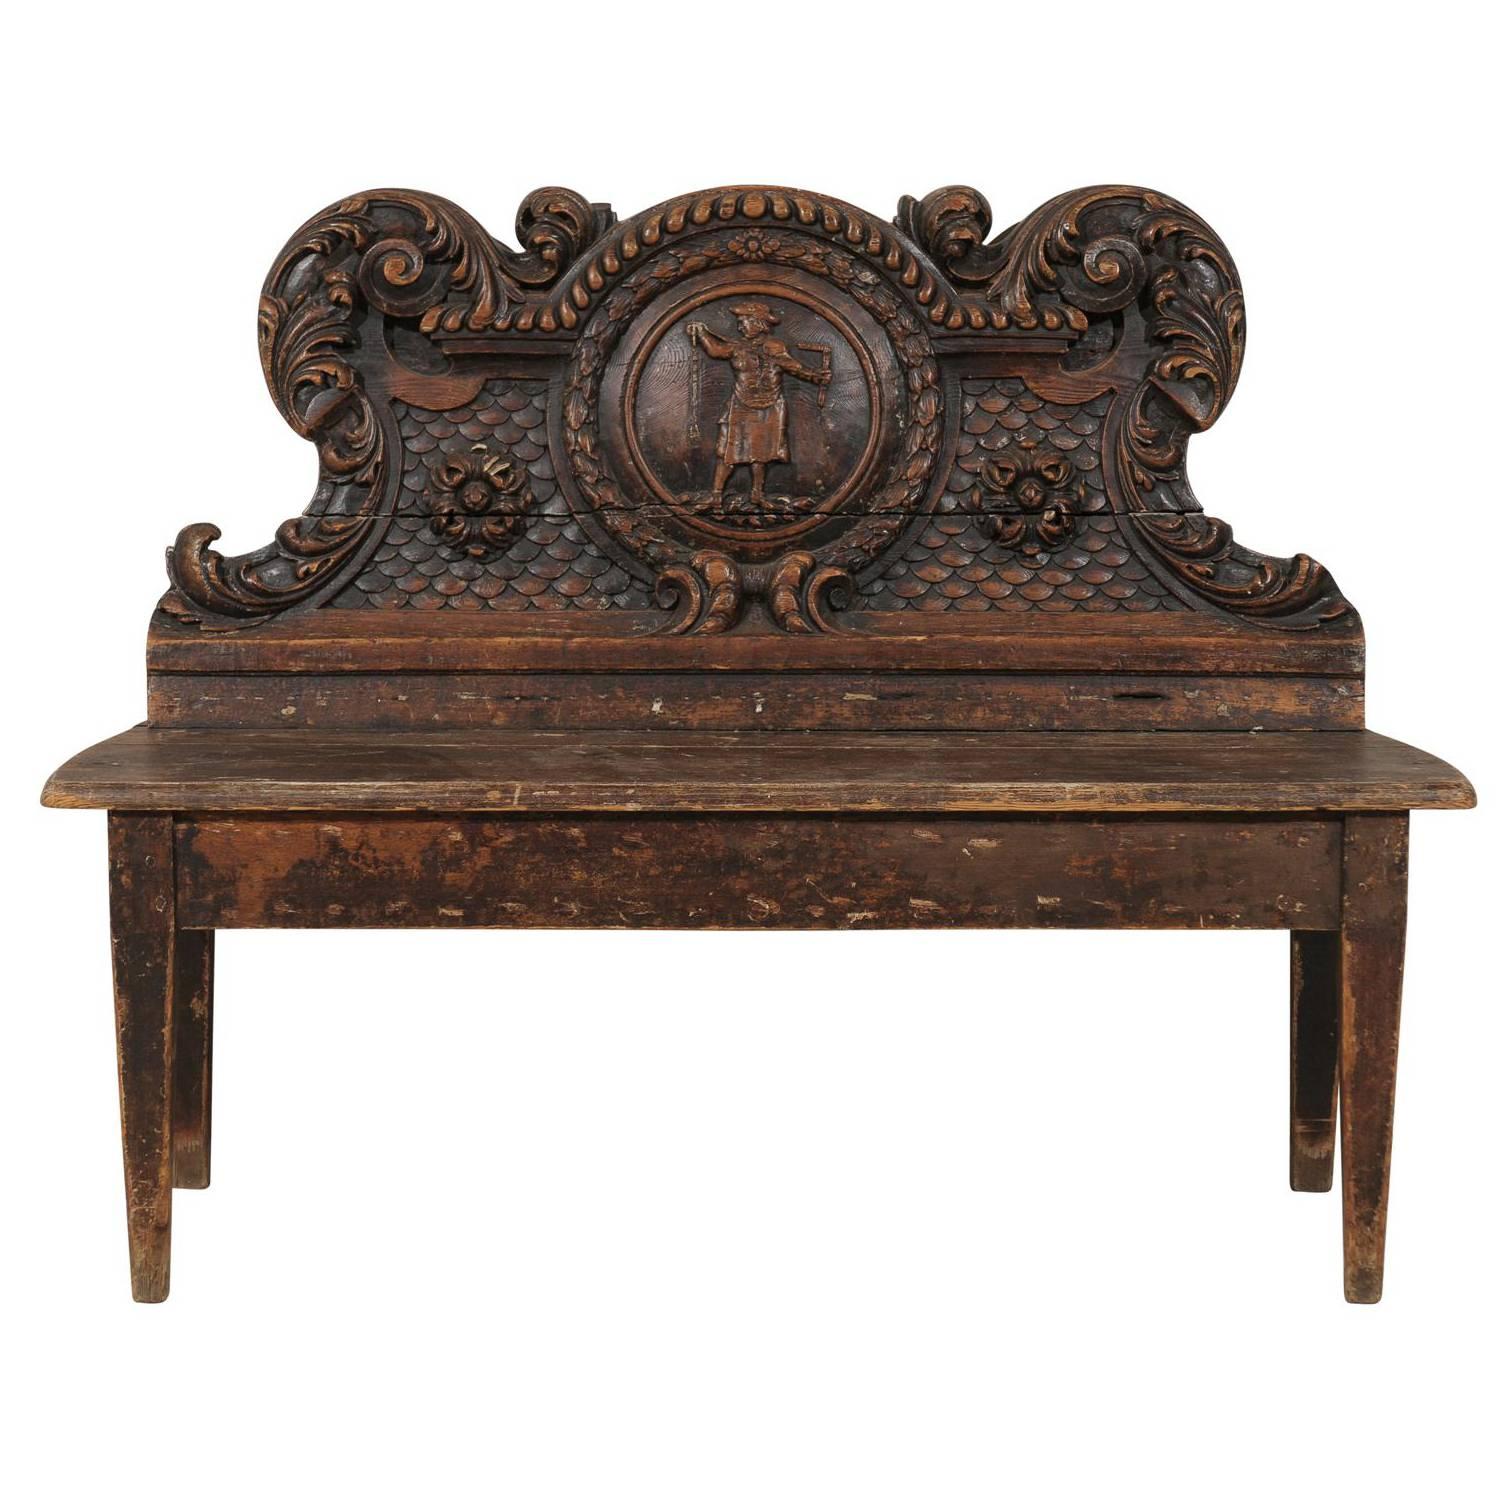 An Italian 18th Century Richly-Carved Wood Bench with Ornate Backrest  